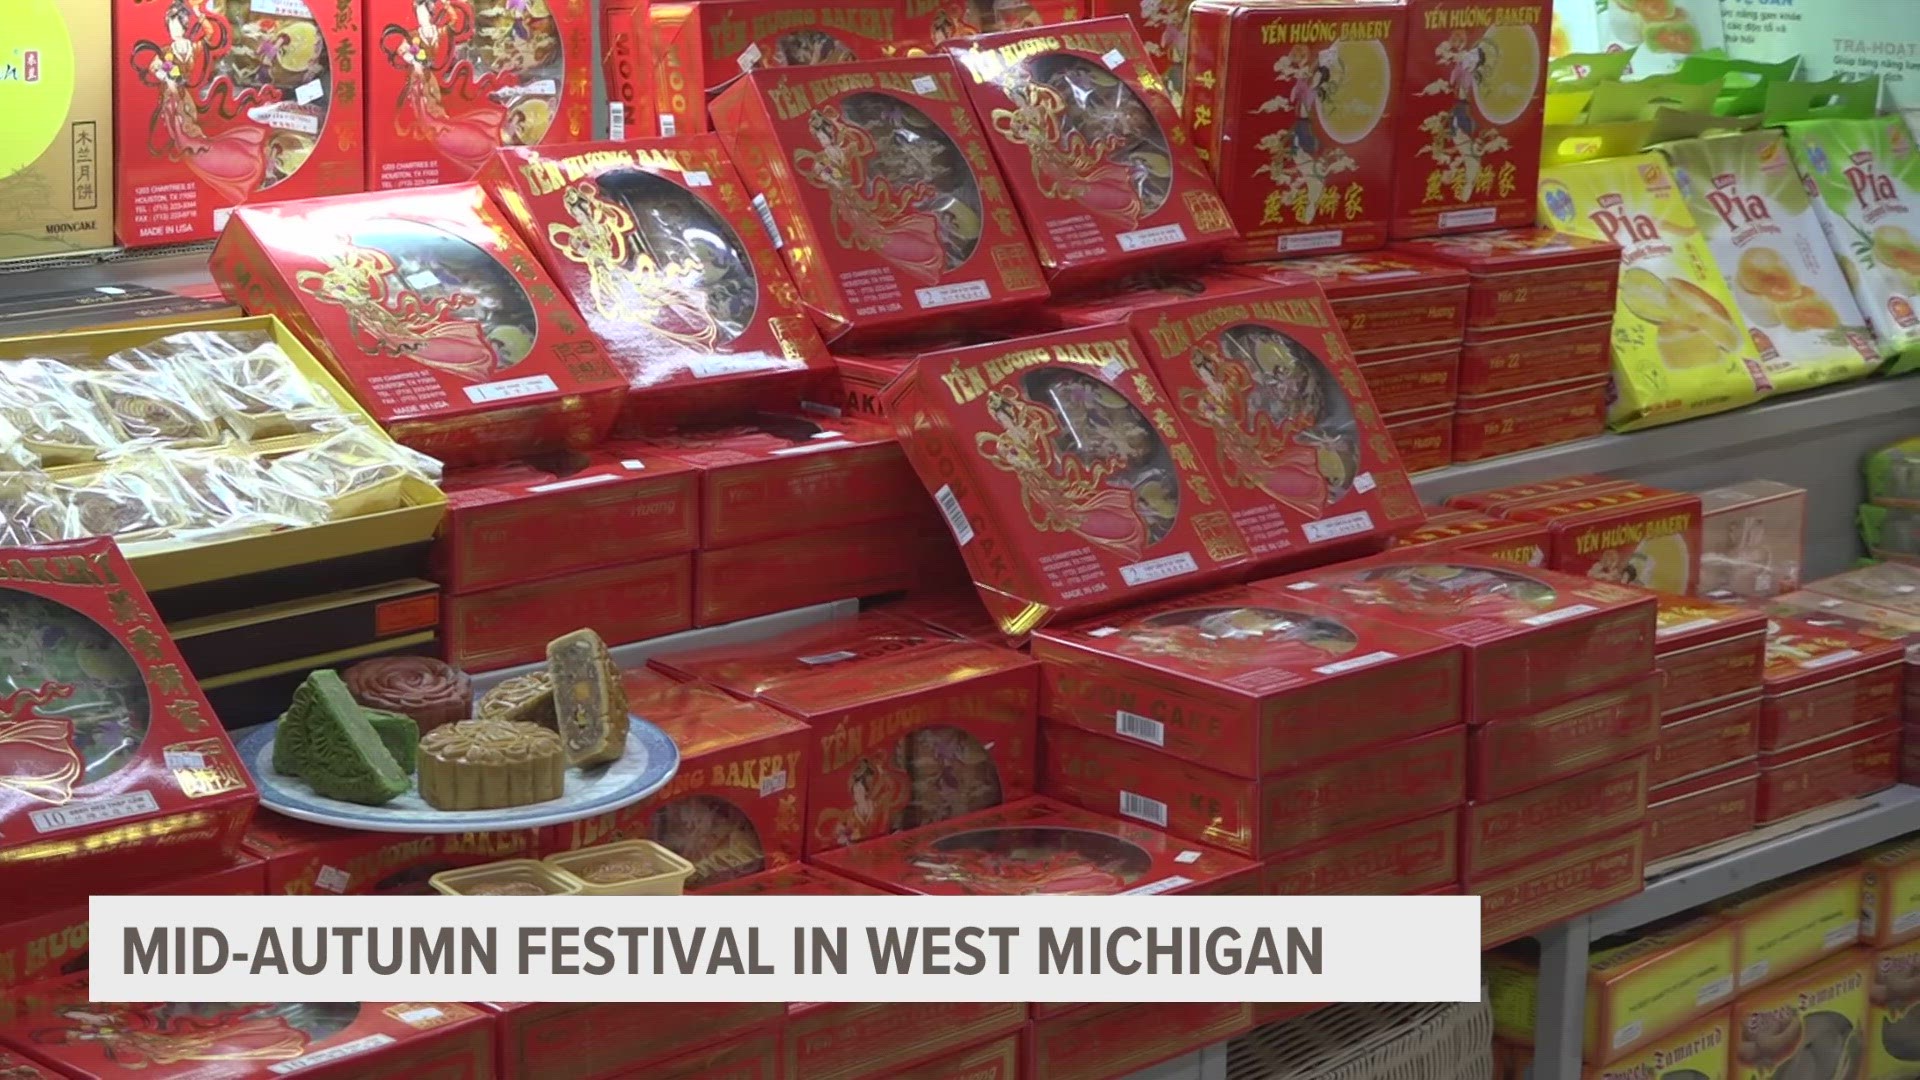 Asian Americans in West Michigan celebrate the Mid-Autumn Festival in a variety of ways, but family is at the center of it all.